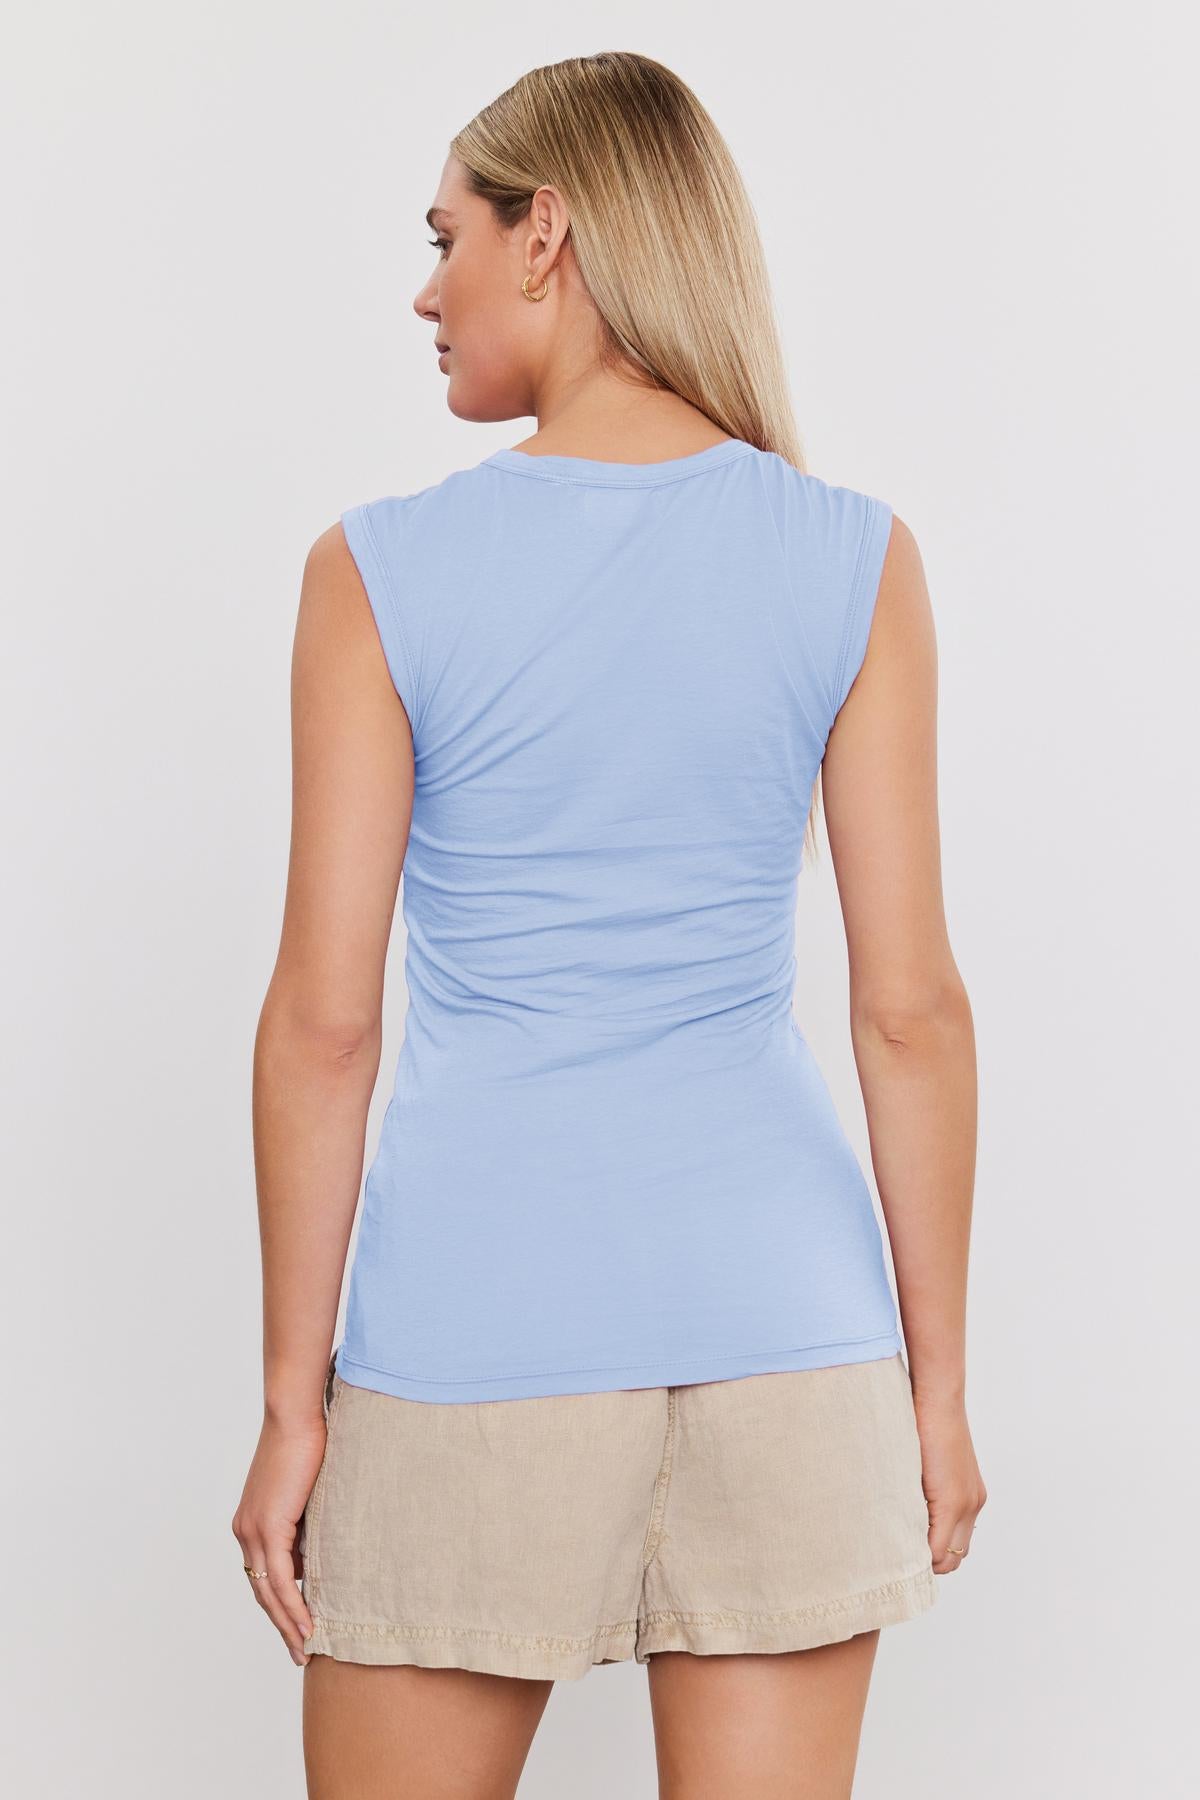 A woman viewed from the back, wearing a blue ESTINA GAUZY WHISPER FITTED TANK TOP and beige shorts, standing against a white background. Brand Name: Velvet by Graham & Spencer-36752924180673